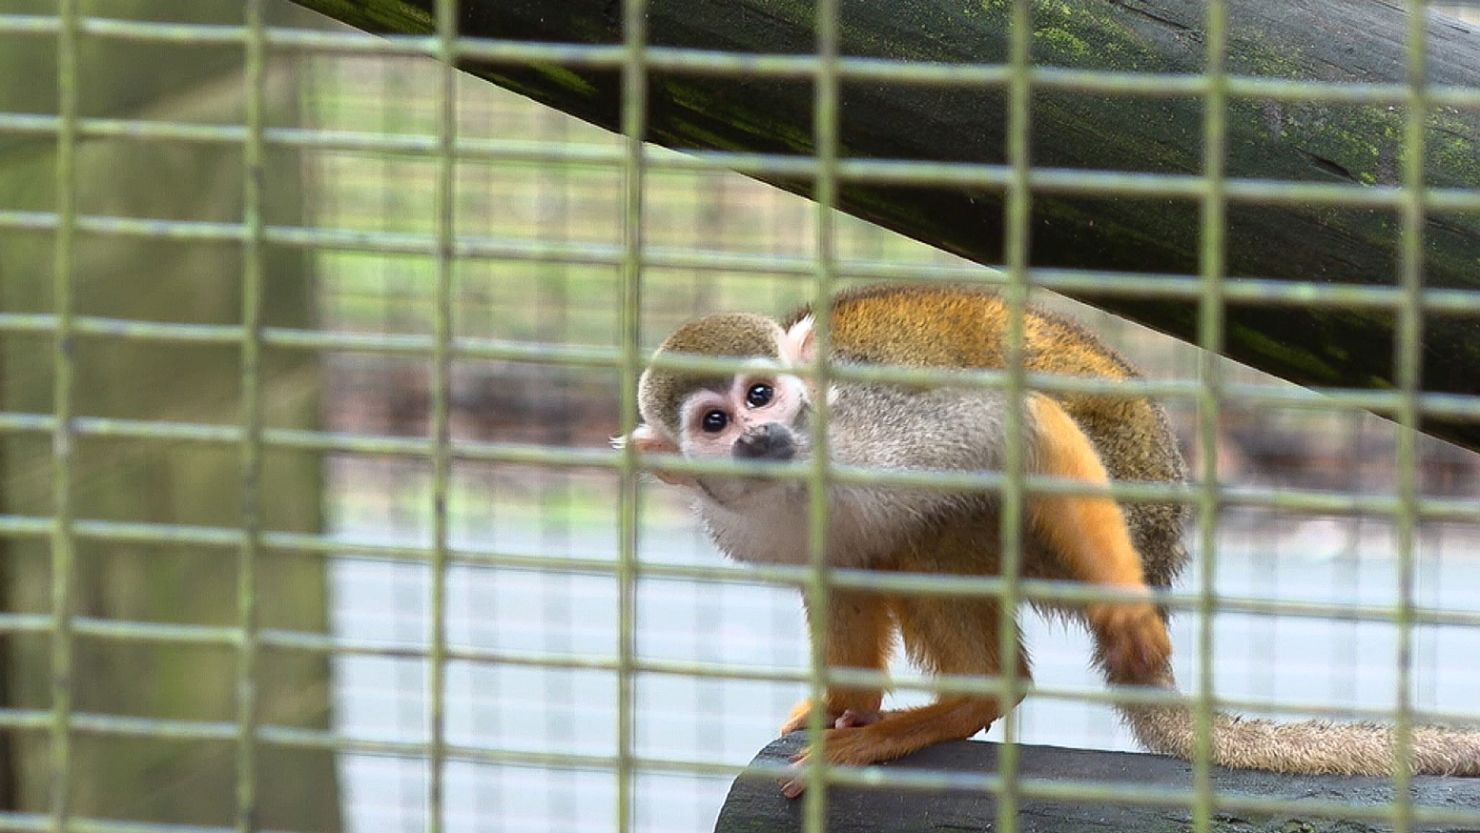 A man was arrested in the theft of 12 squirrel monkeys from a zoo in Broussard, Louisiana.